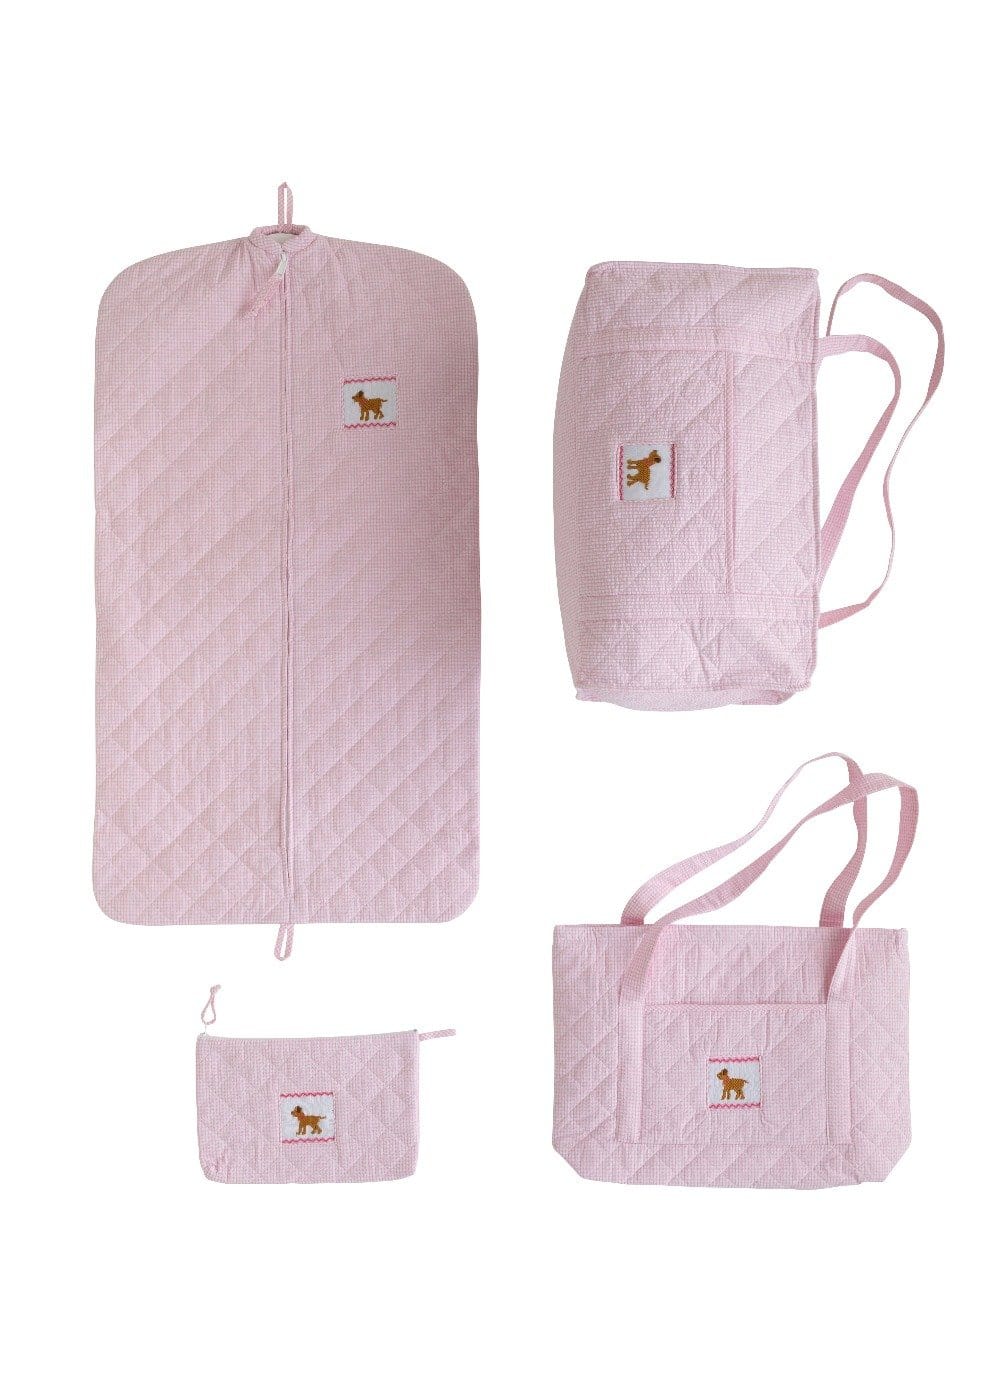 Quilted Luggage Set